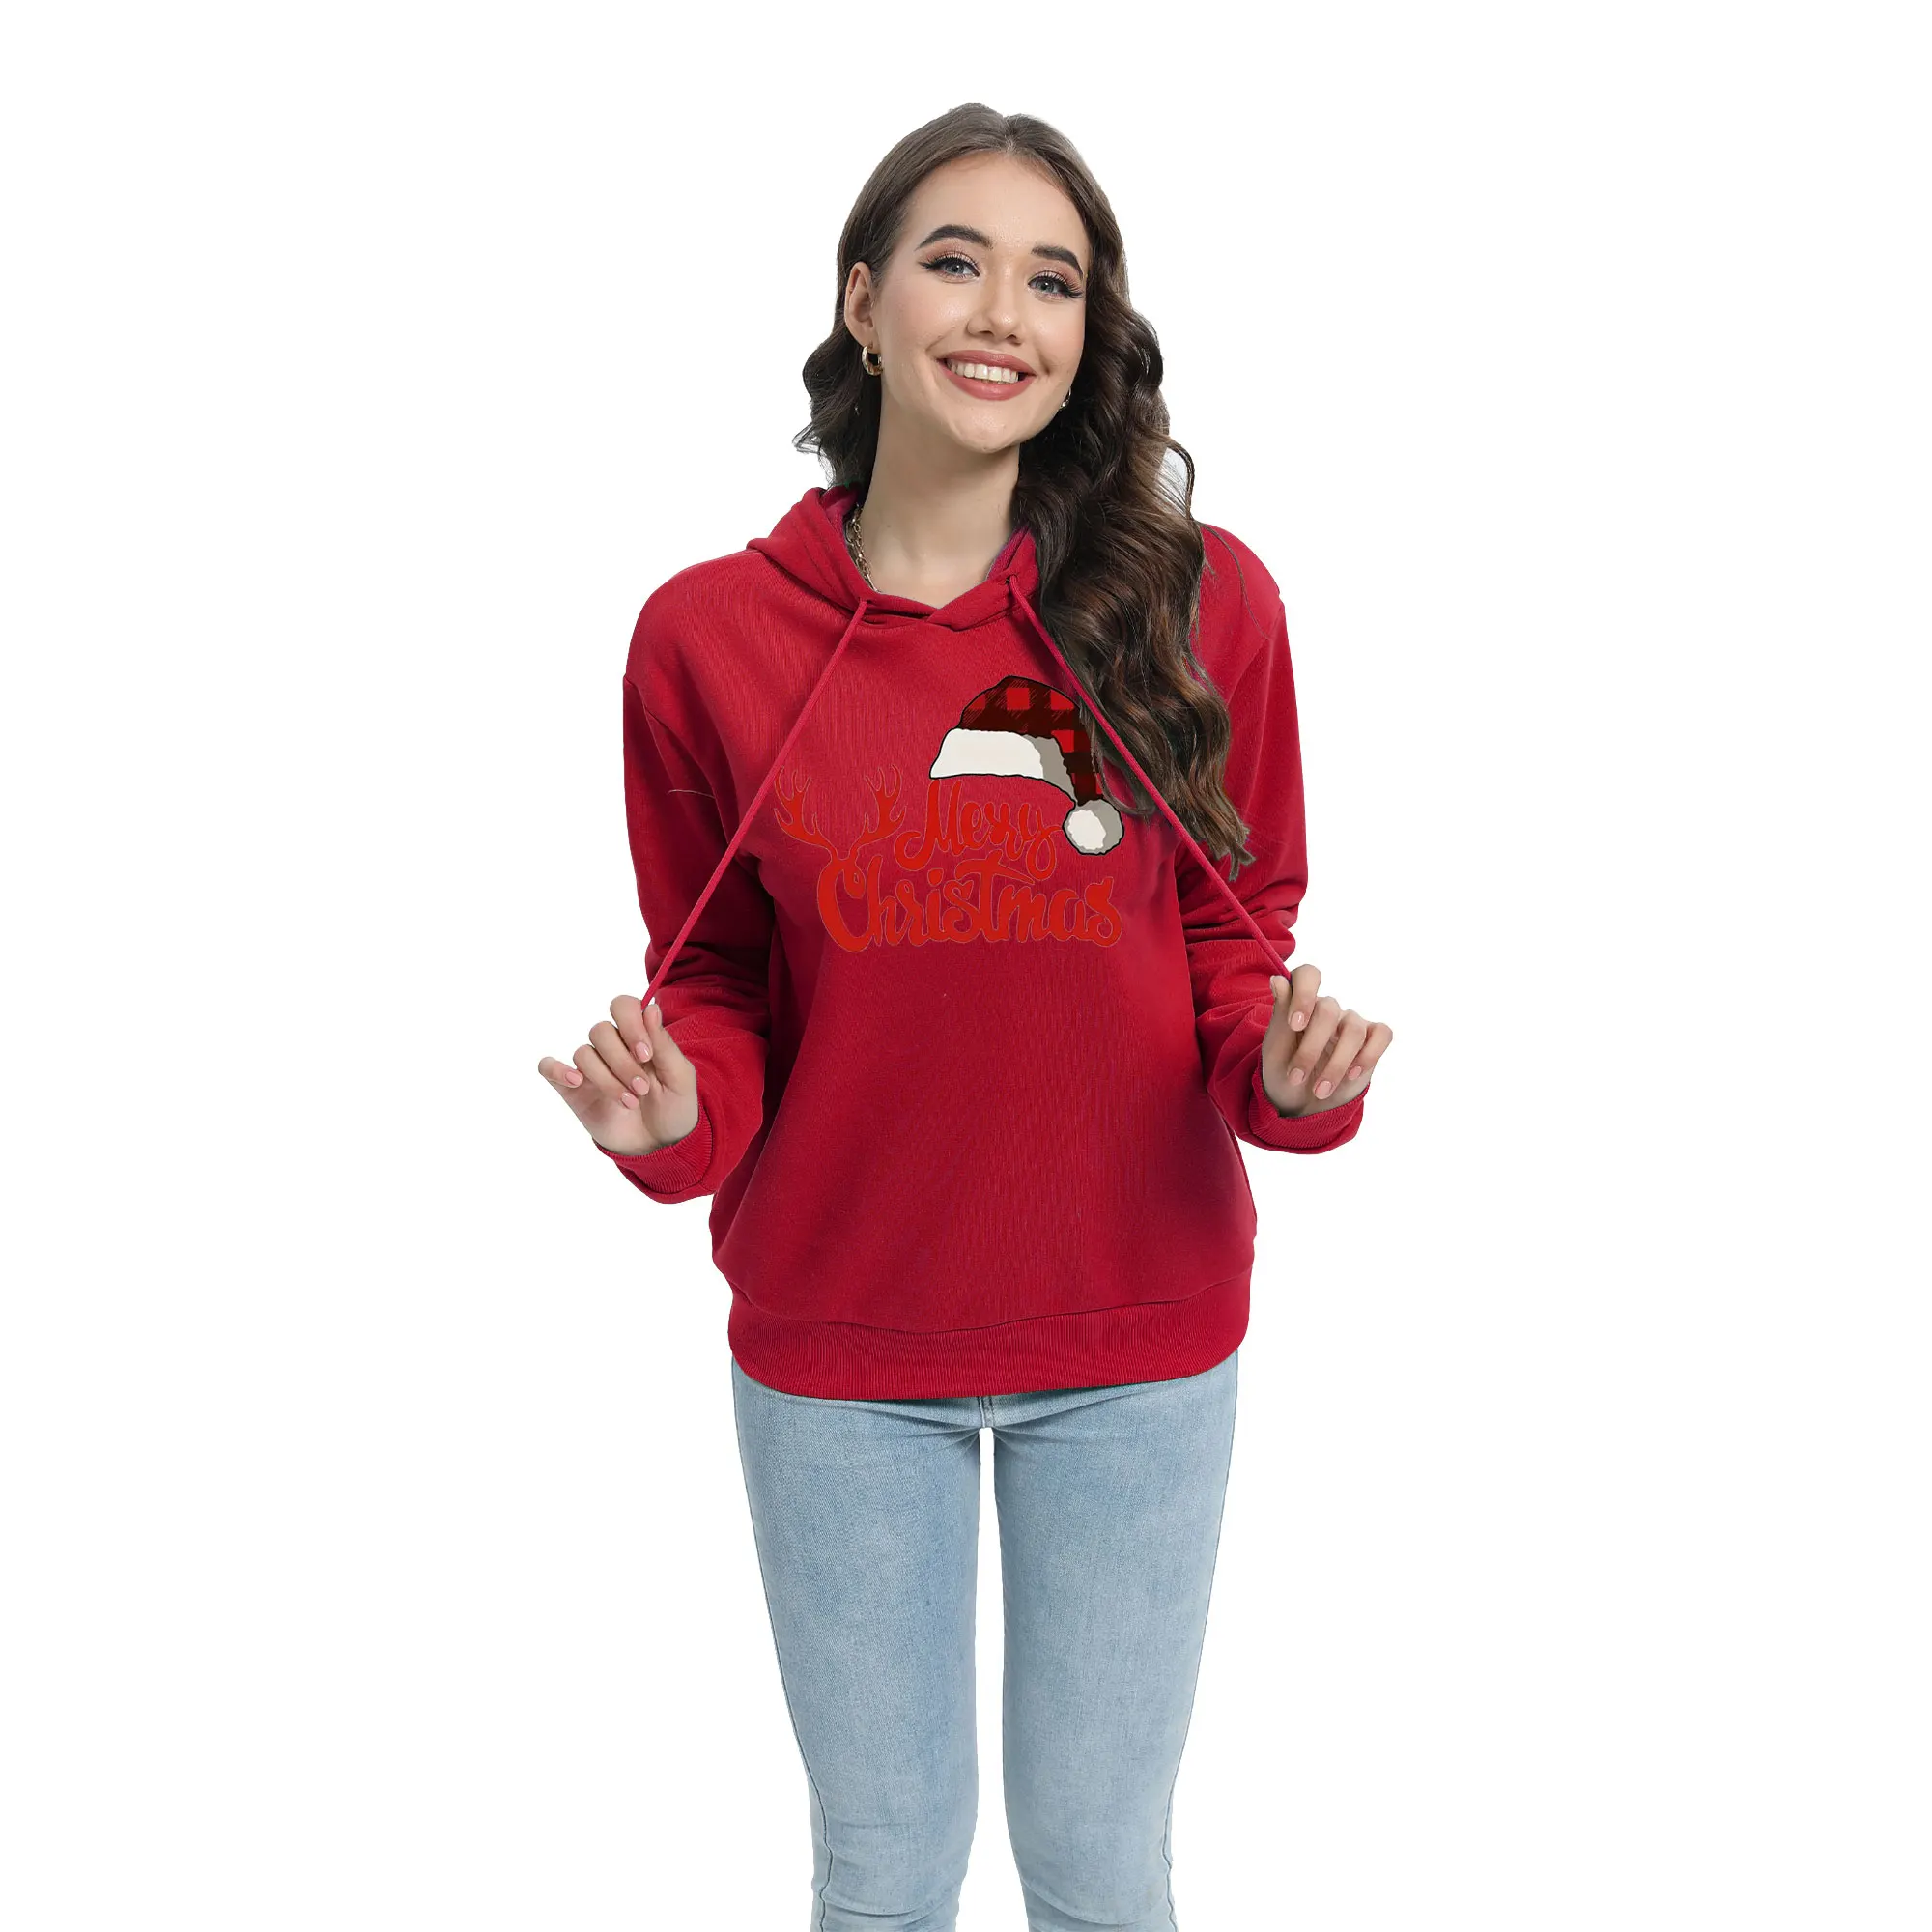 Christmas Merry Christmas Sports Shirt Round Neck Long Sleeve Printed Pattern Street Clothing Women's Large Hoodie